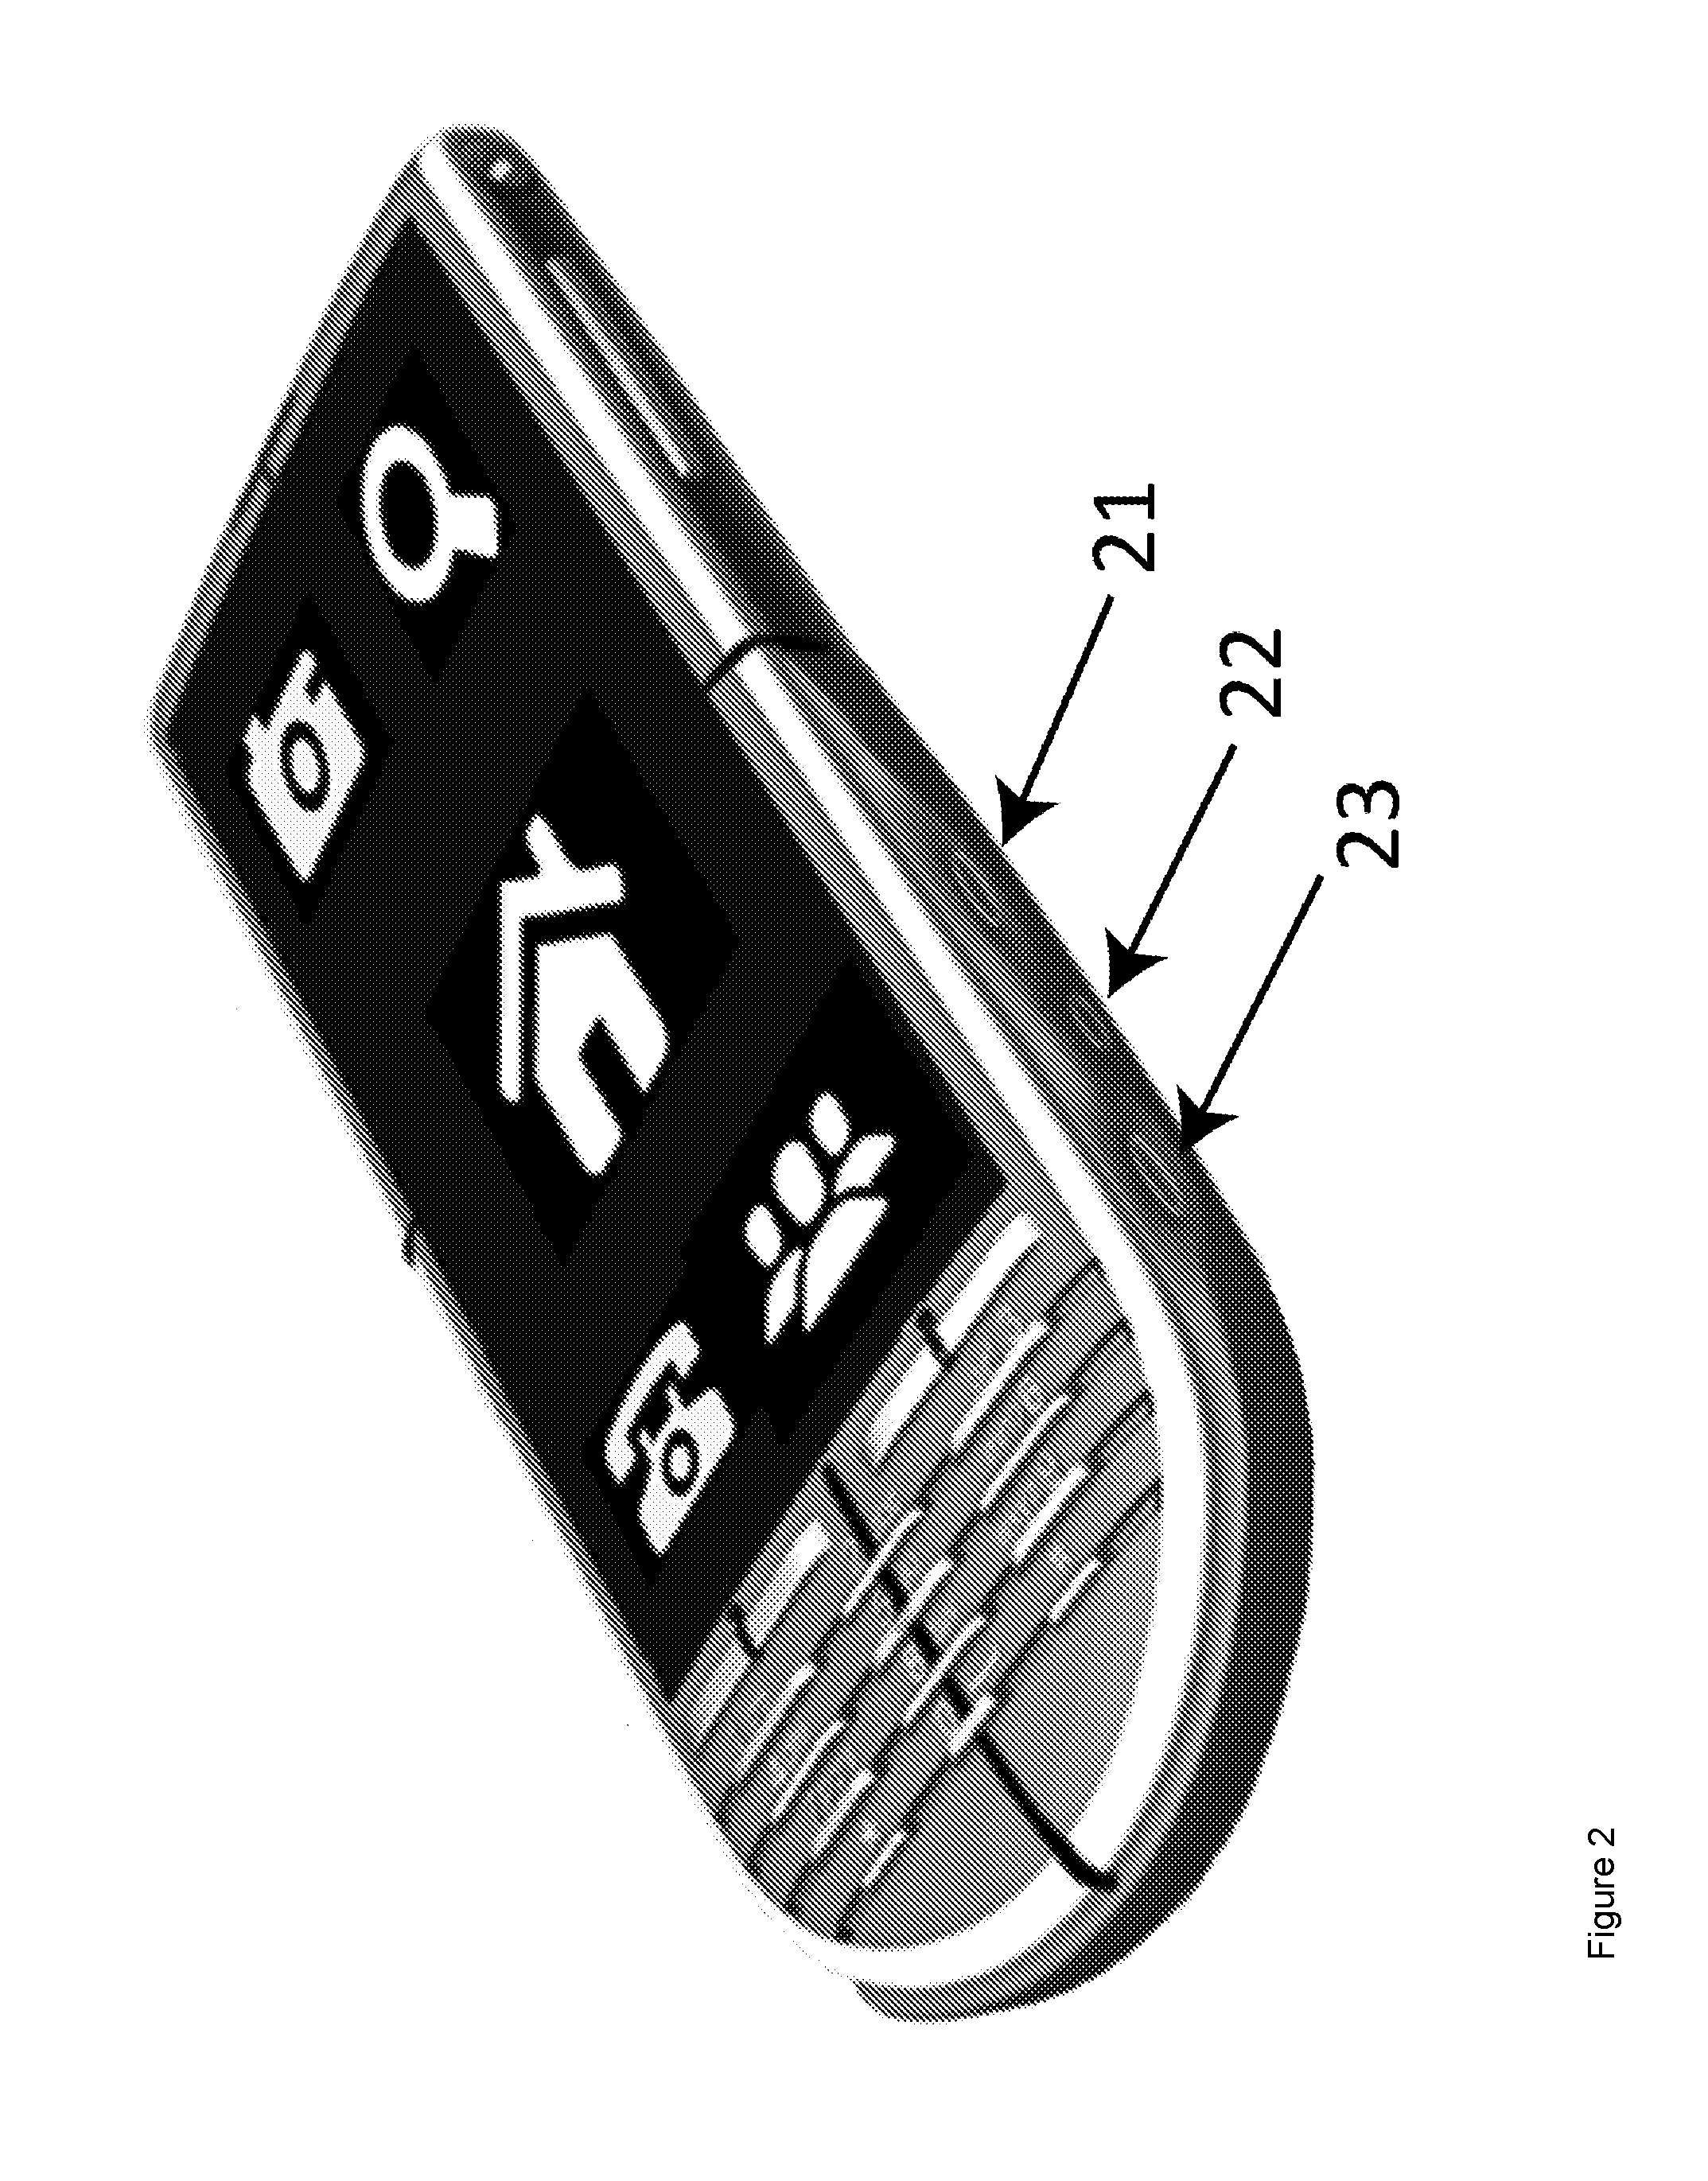 Mobile computing device for blind or low-vision users